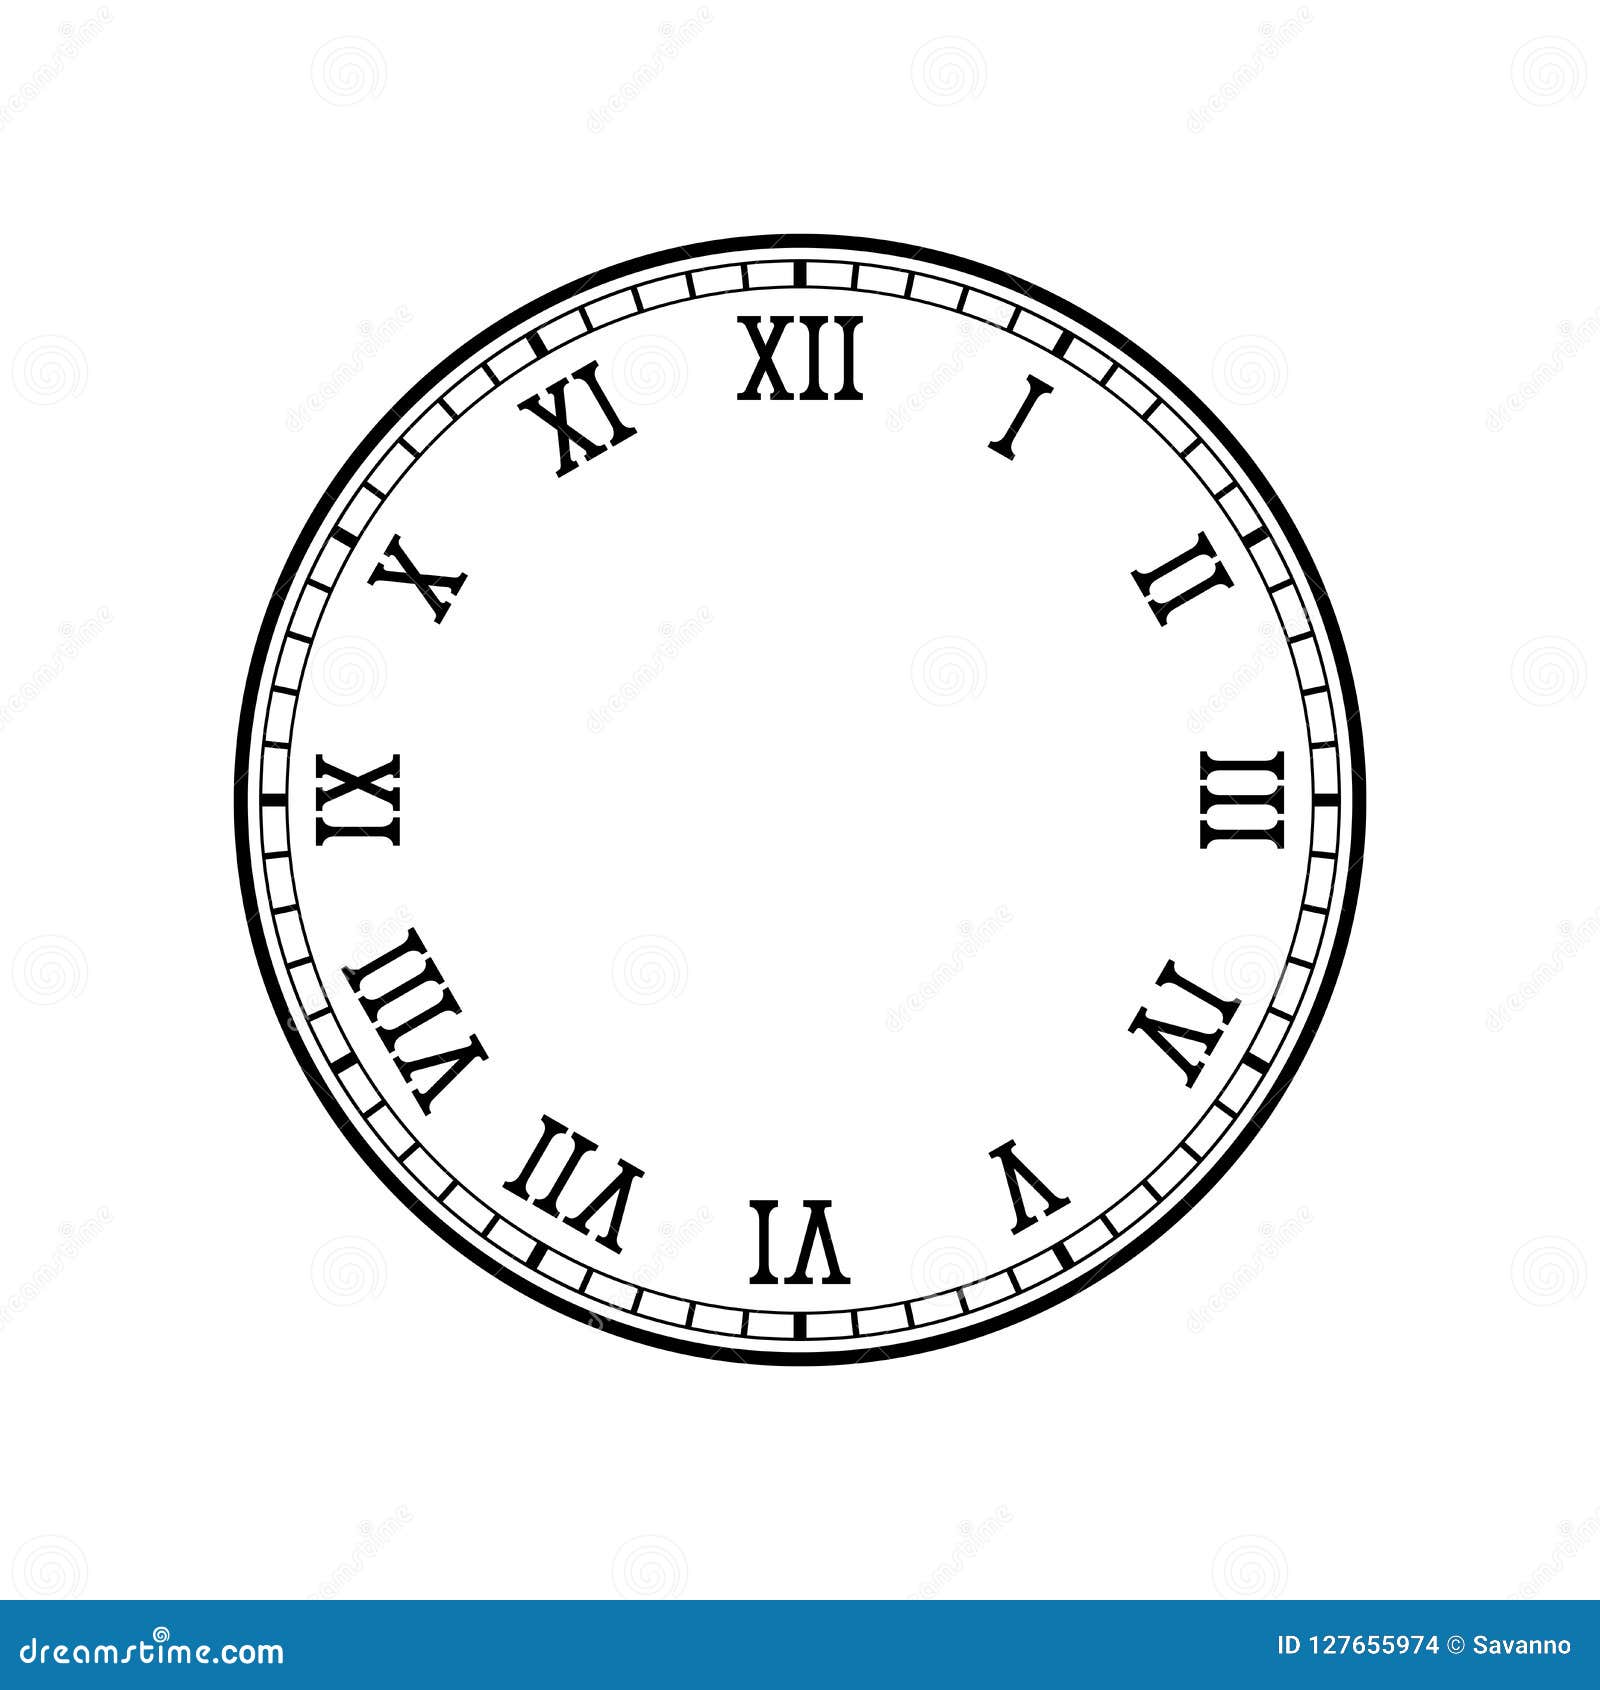 clock face with roman numerals